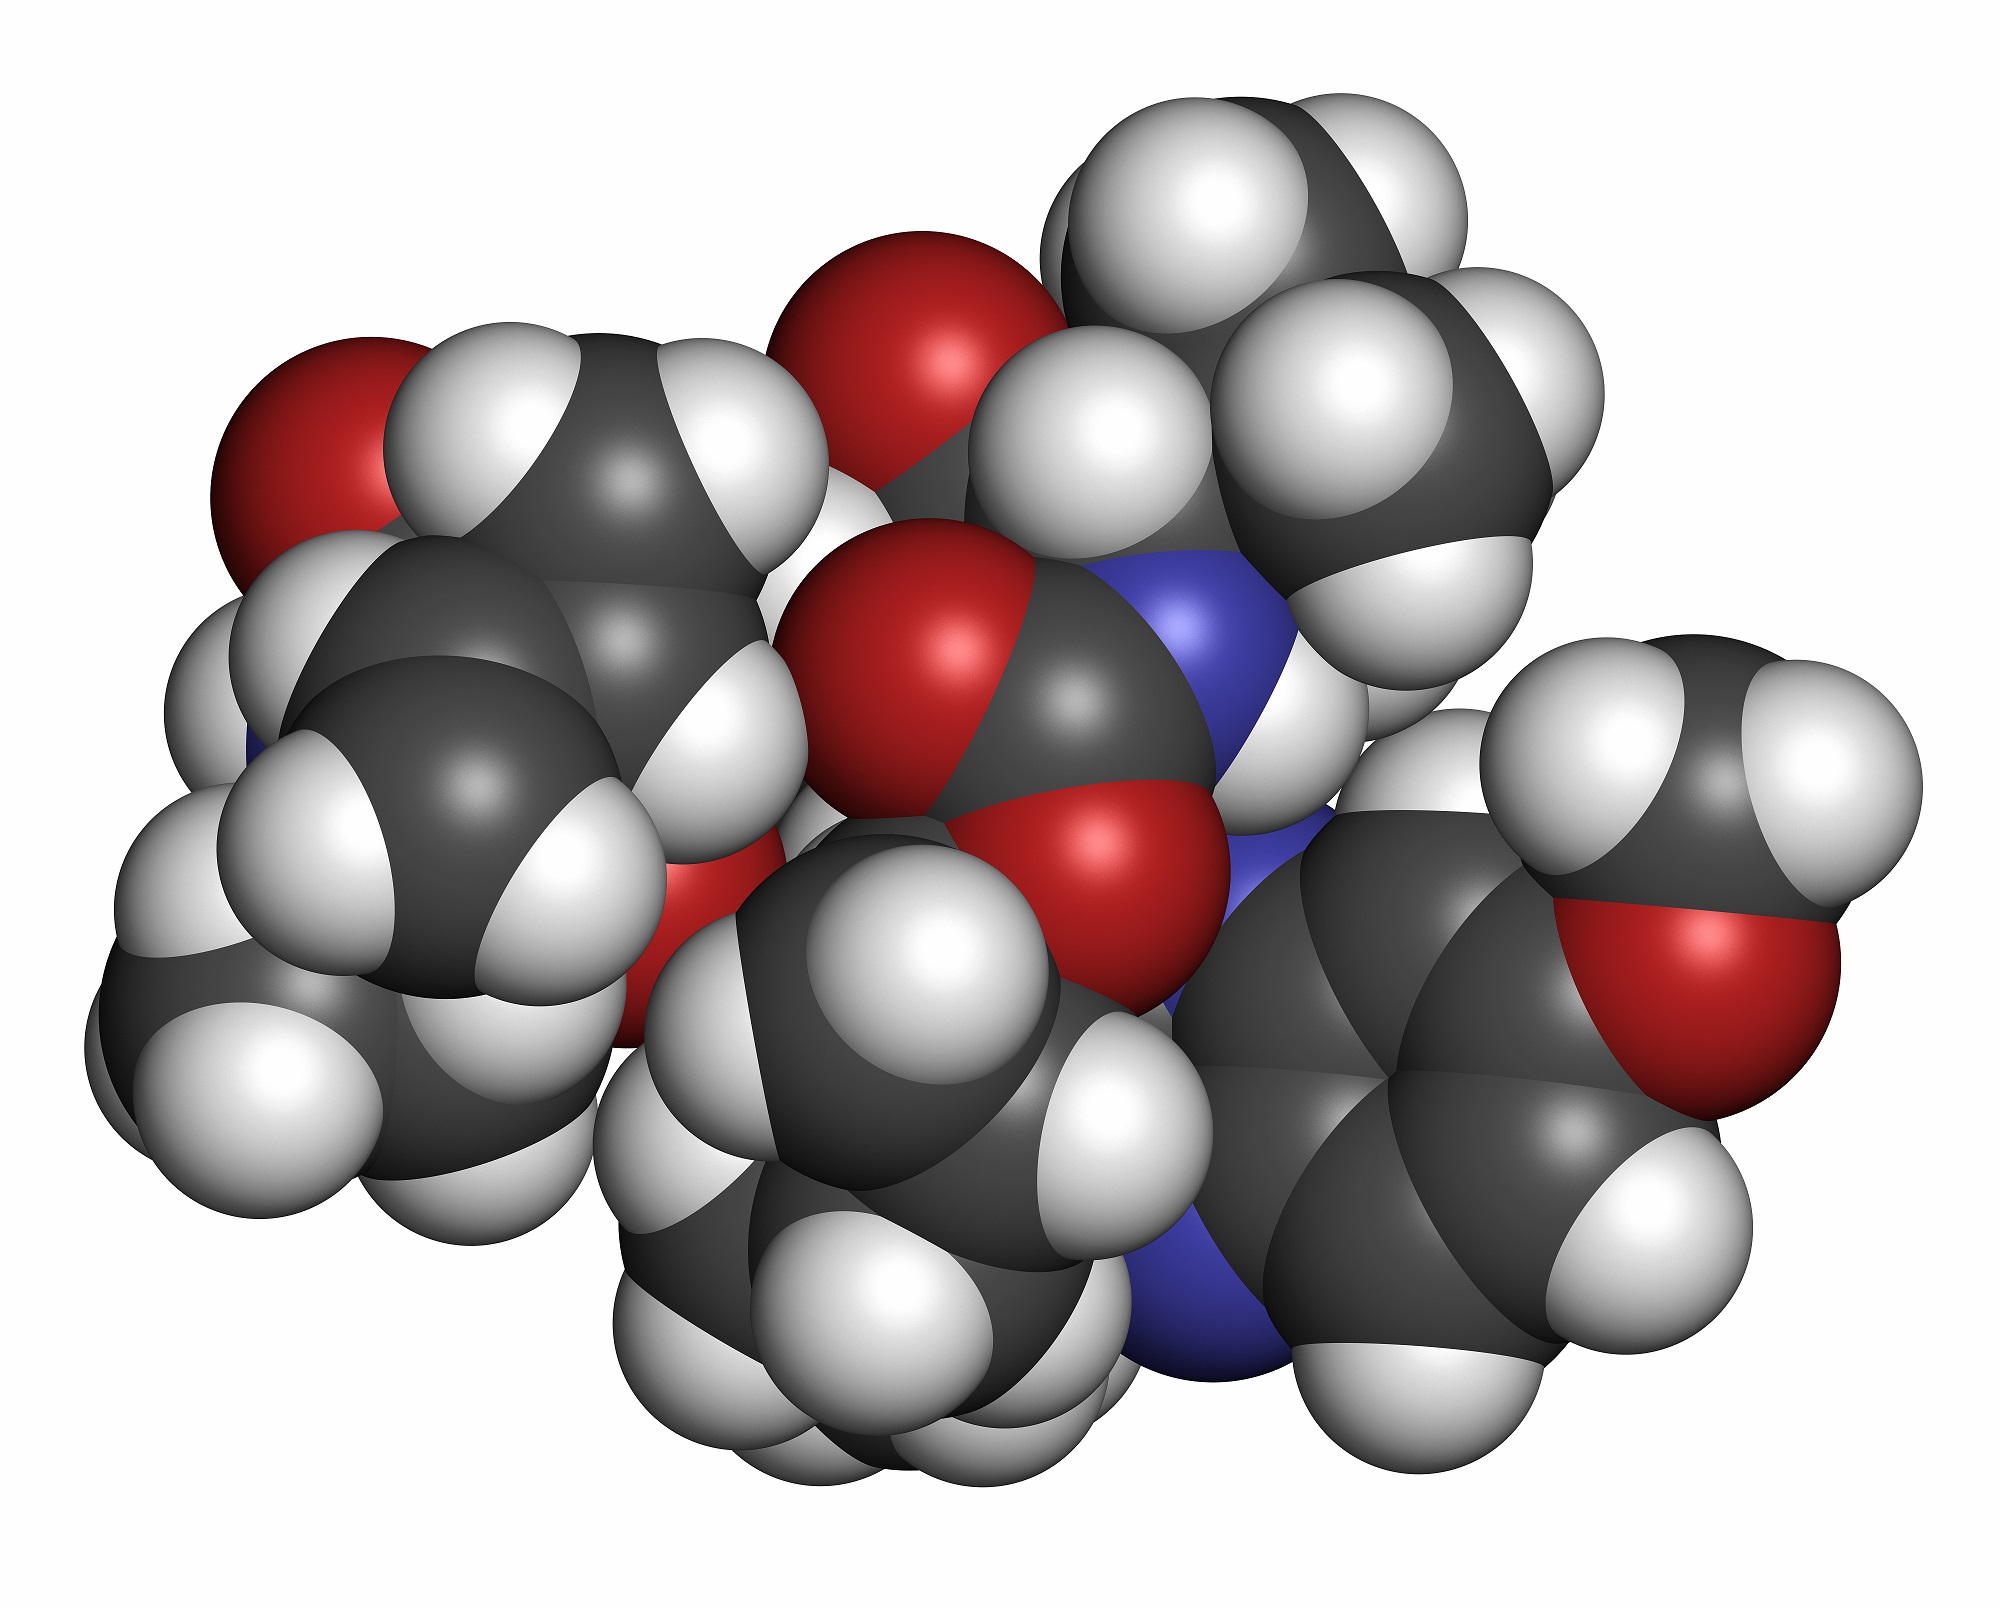 Grazoprevir hepatitis C virus drug molecule (protease inhibitor). Atoms are represented as spheres with conventional color coding: hydrogen (white), carbon (grey), oxygen (red), nitrogen (blue), sulfur (yellow).